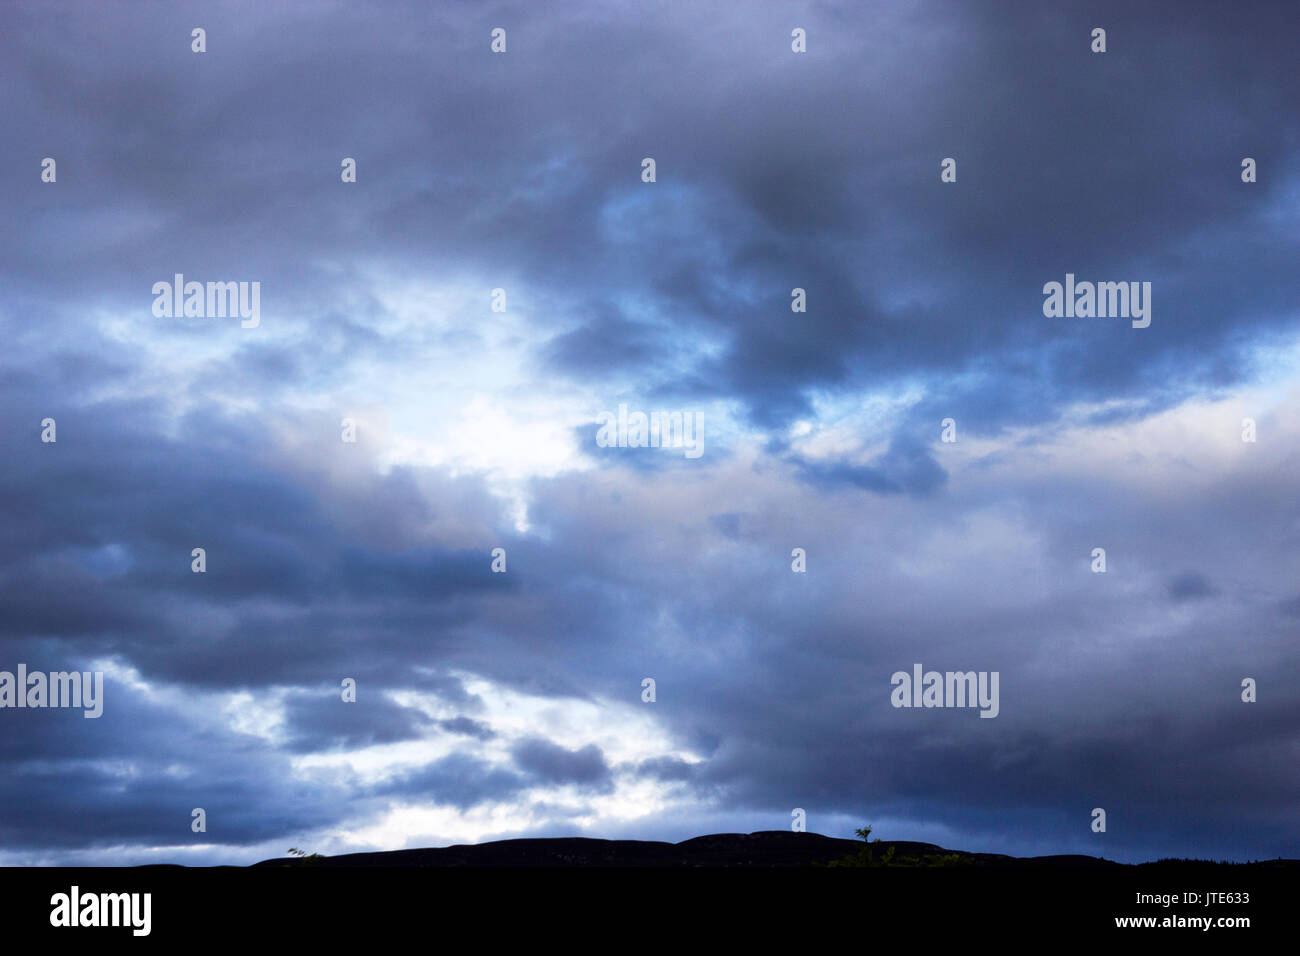 Blue Sky, Cloudy, Overcast, Weather, Climate, Atmosphere, Outline, Silhouette, Shadowy, Contrast, Abstract, Dramatic Skyline Stock Photo